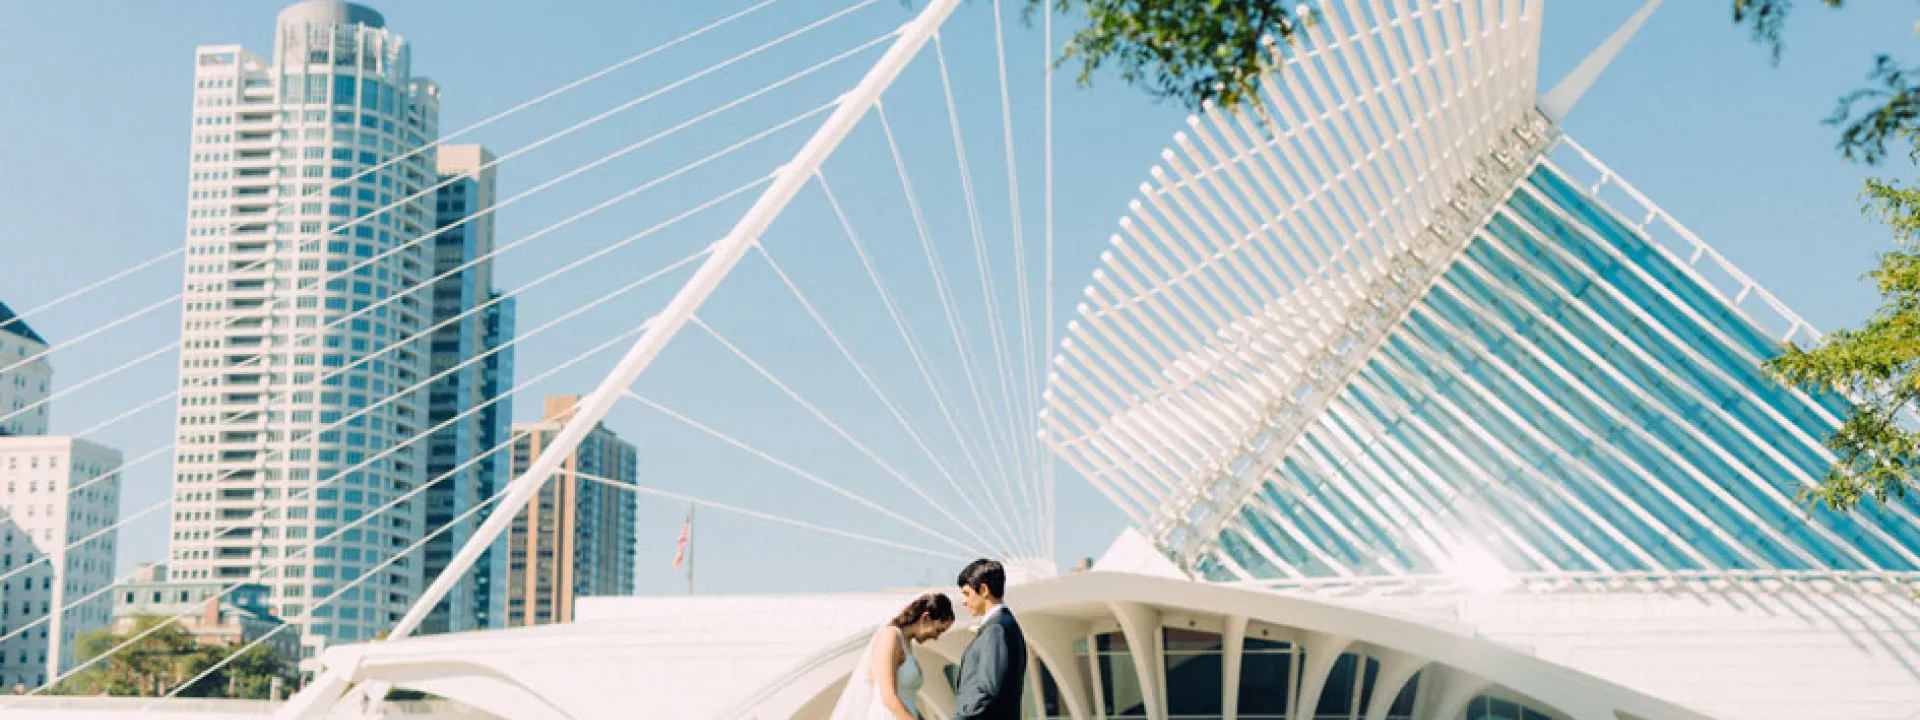 Bride and groom stand before the Quadracci Pavilion at the Milwaukee Art Museum